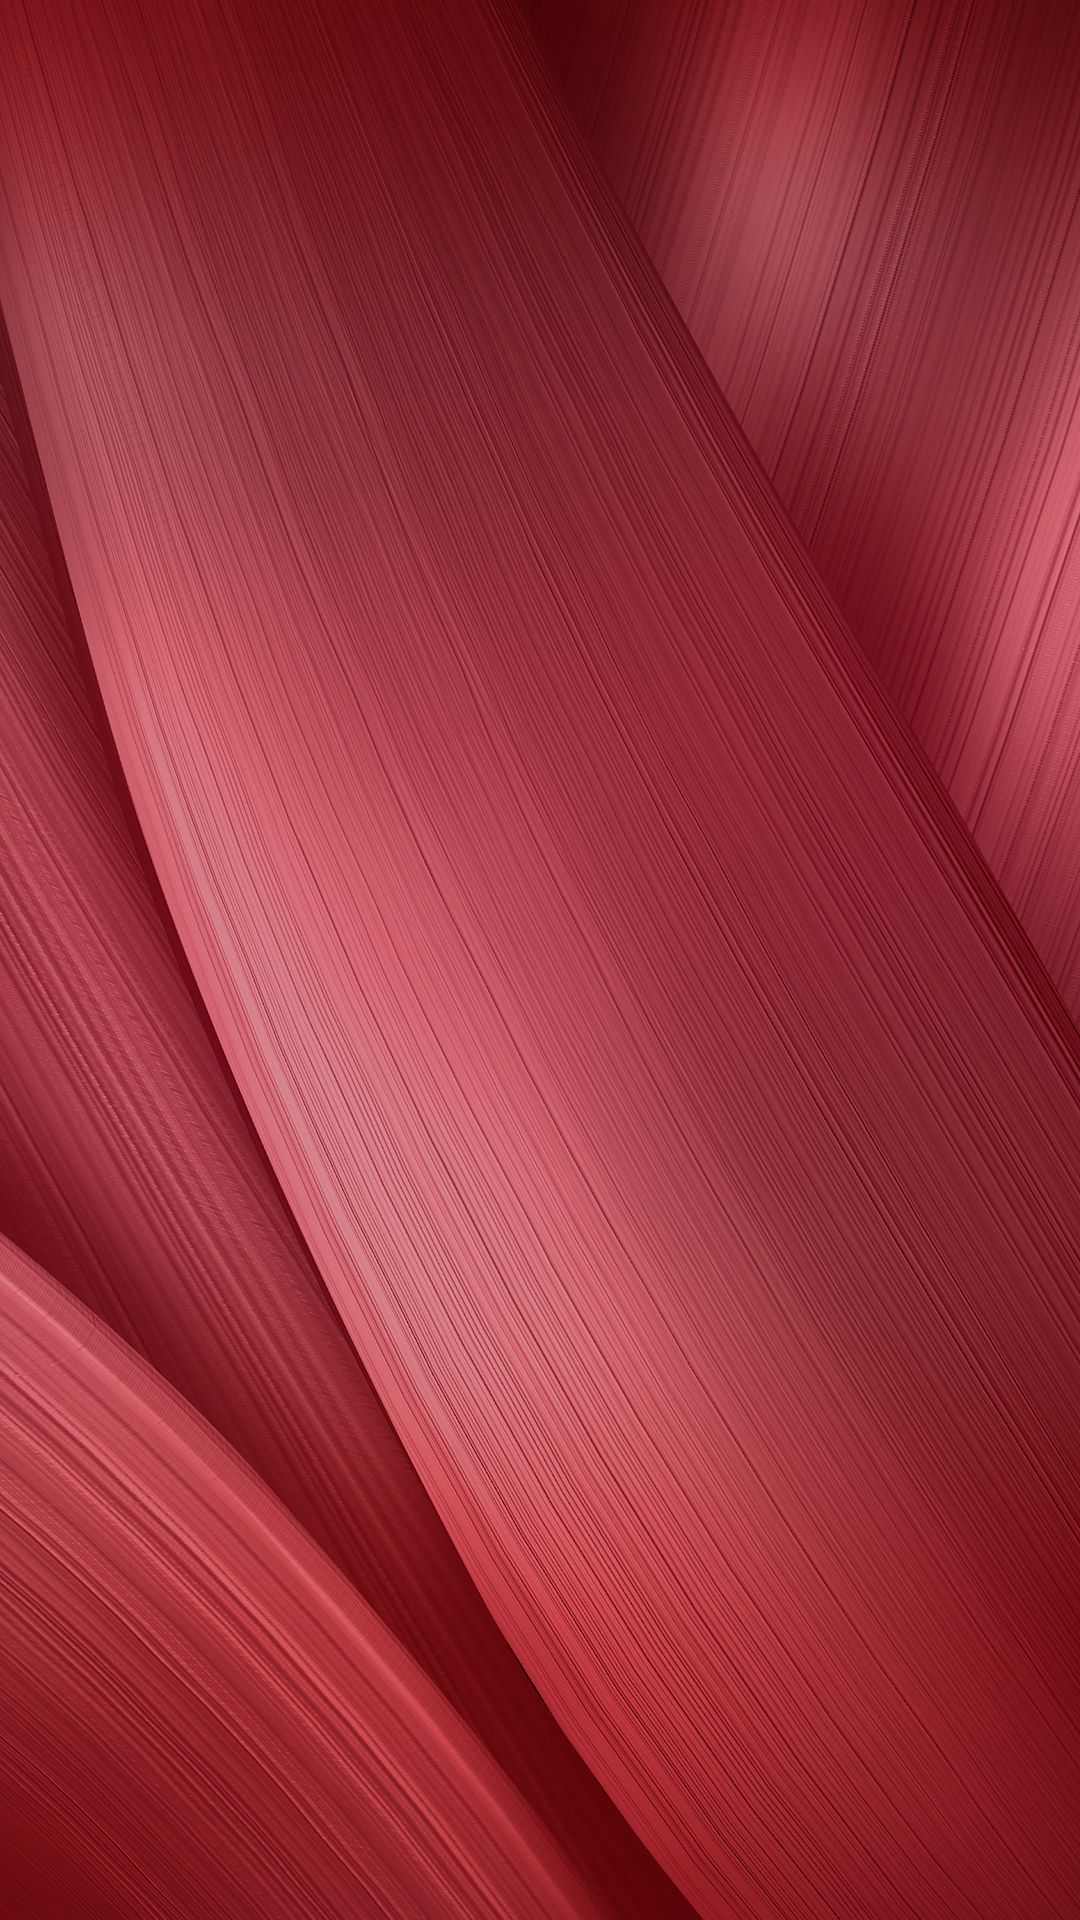 Free download Download Stock Asus Zenfone 2 high resolution wallpaper [1080x1920] for your Desktop, Mobile & Tablet. Explore Asus Zenfone 2 Wallpaper. Asus Rog Wallpaper, Asus Wallpaper Hd, Asus Wallpaper